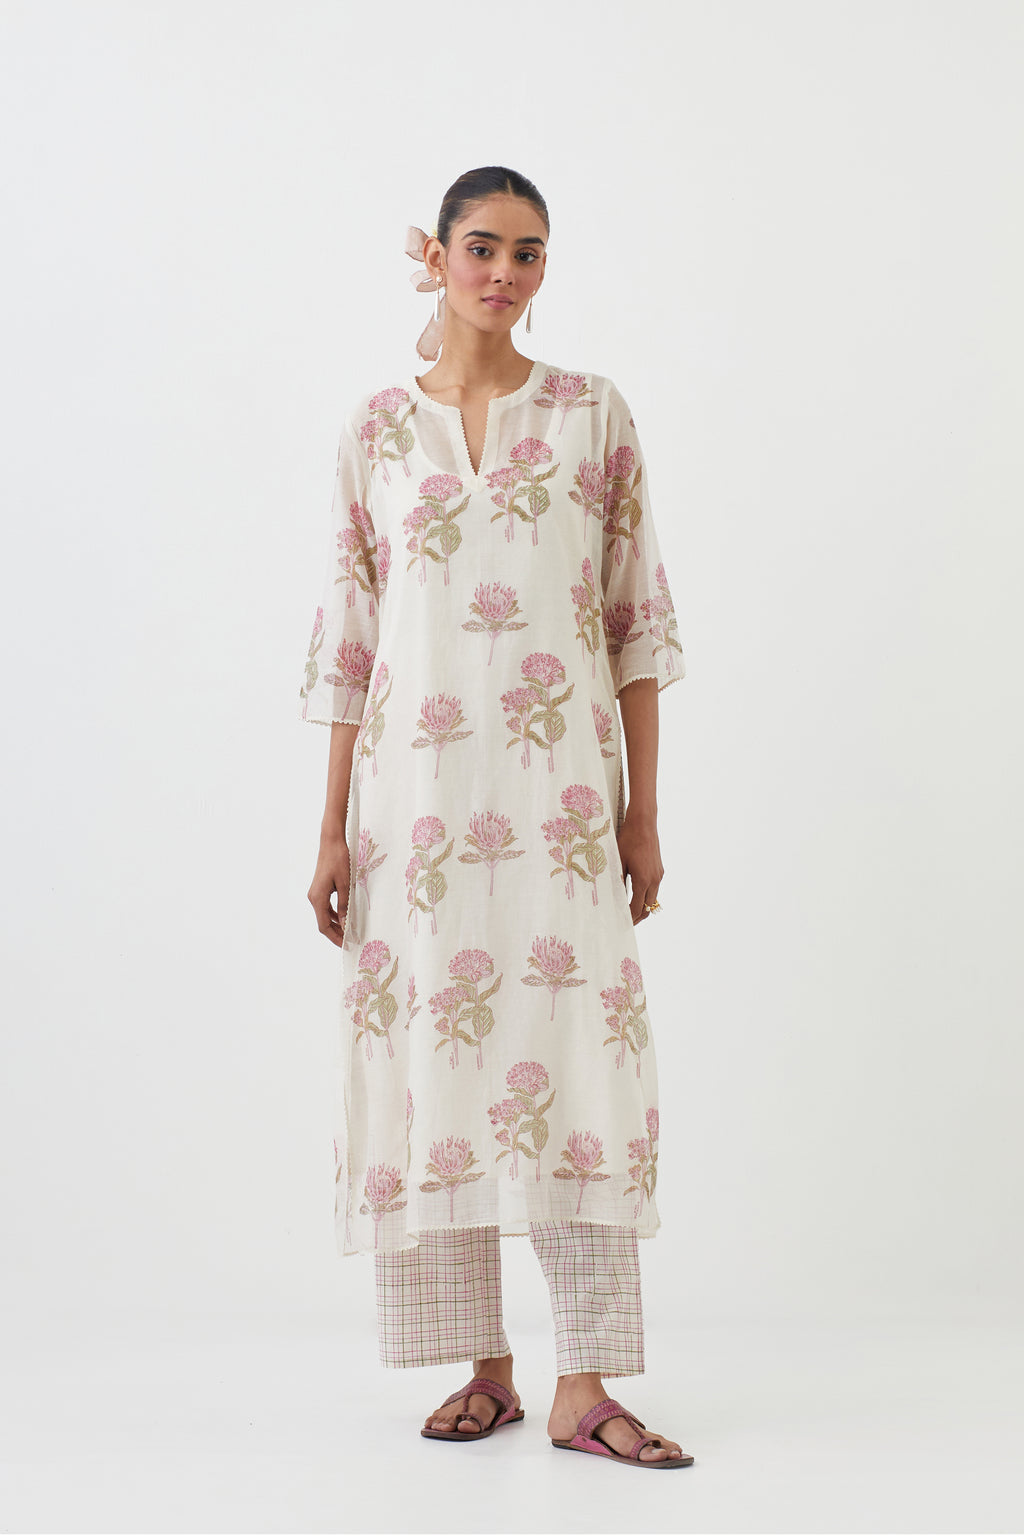 Off white cotton chanderi hand block printed kurta set with all-over pink colored flower.